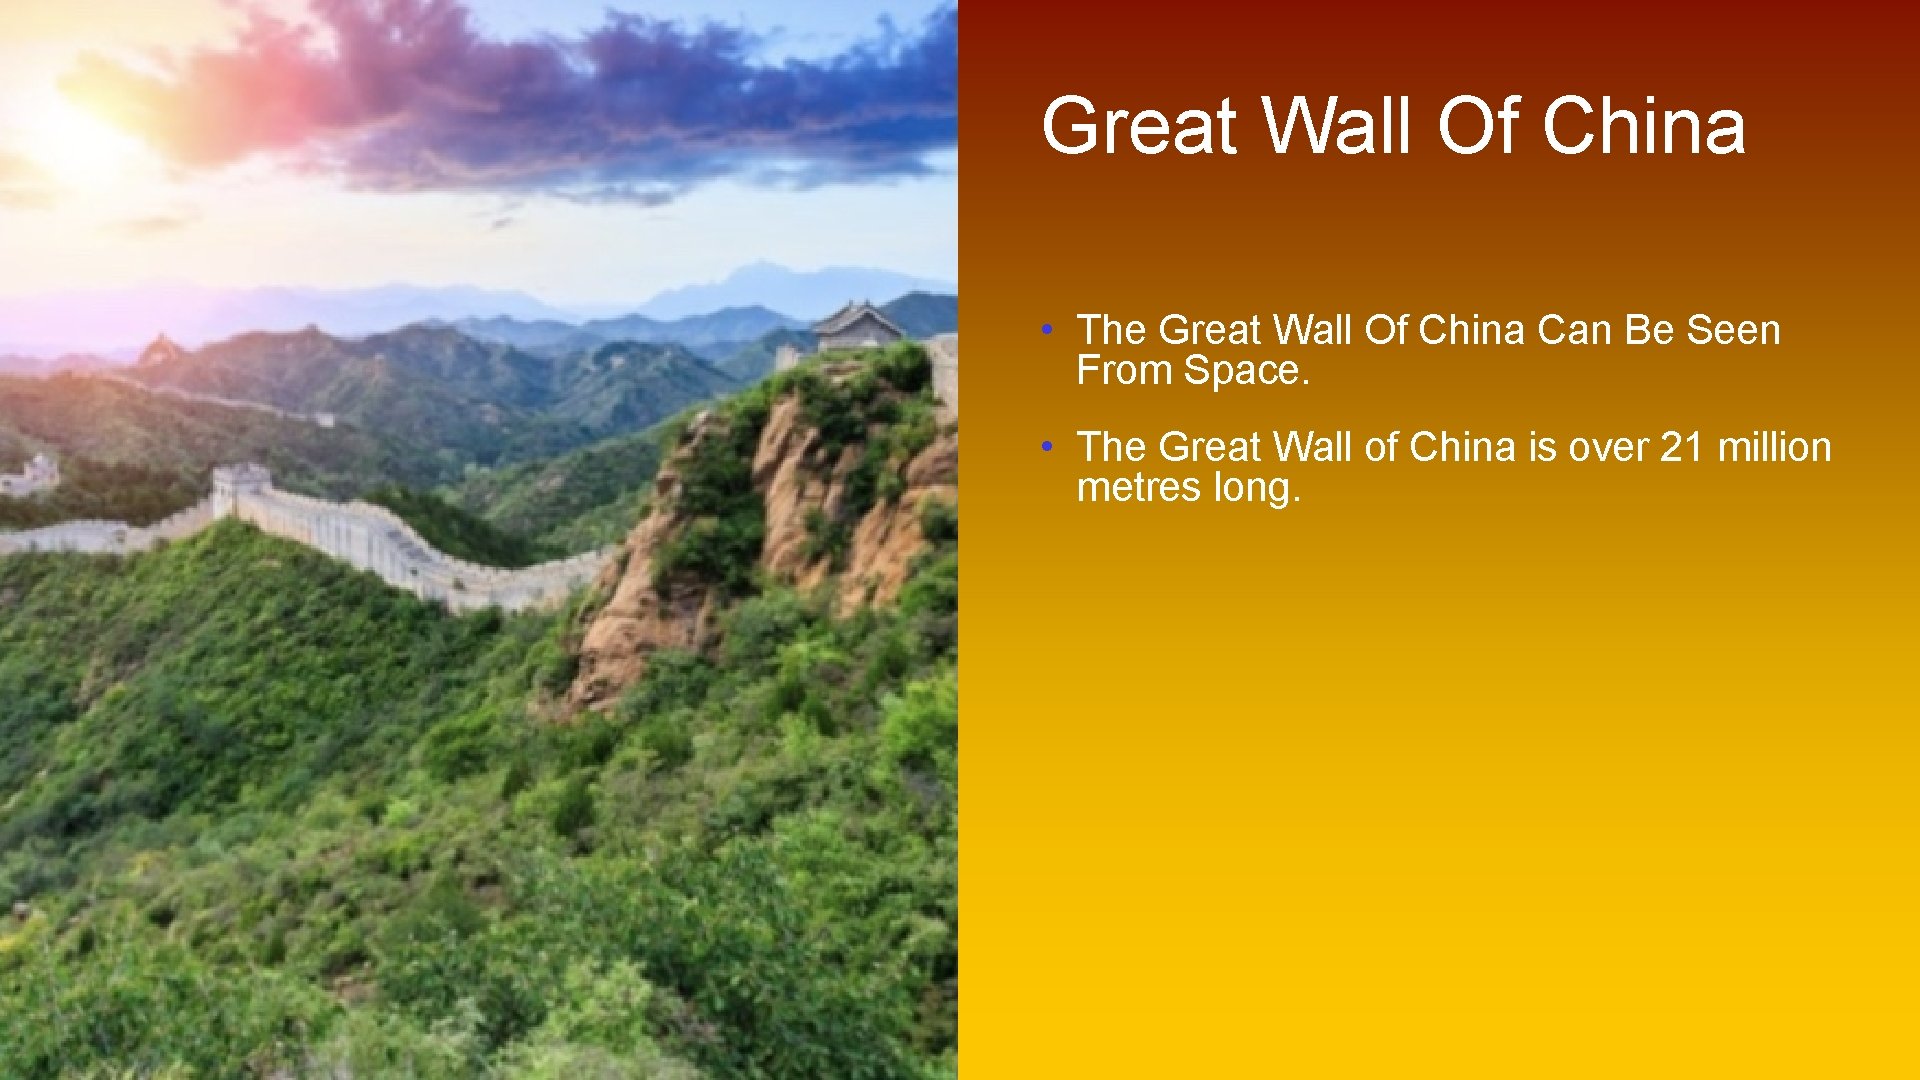 Great Wall Of China • The Great Wall Of China Can Be Seen From